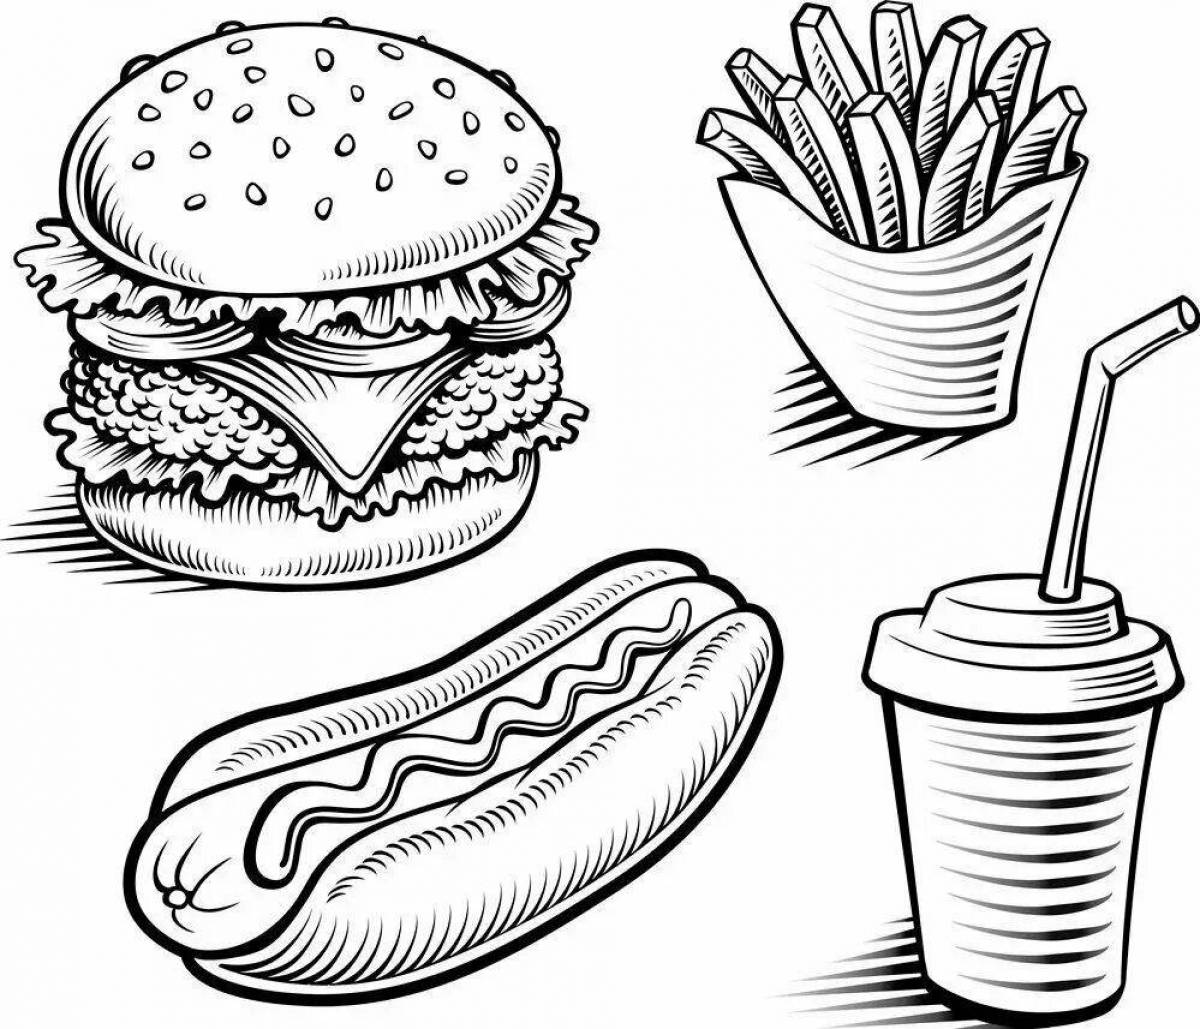 Tempting aesthetic food coloring page